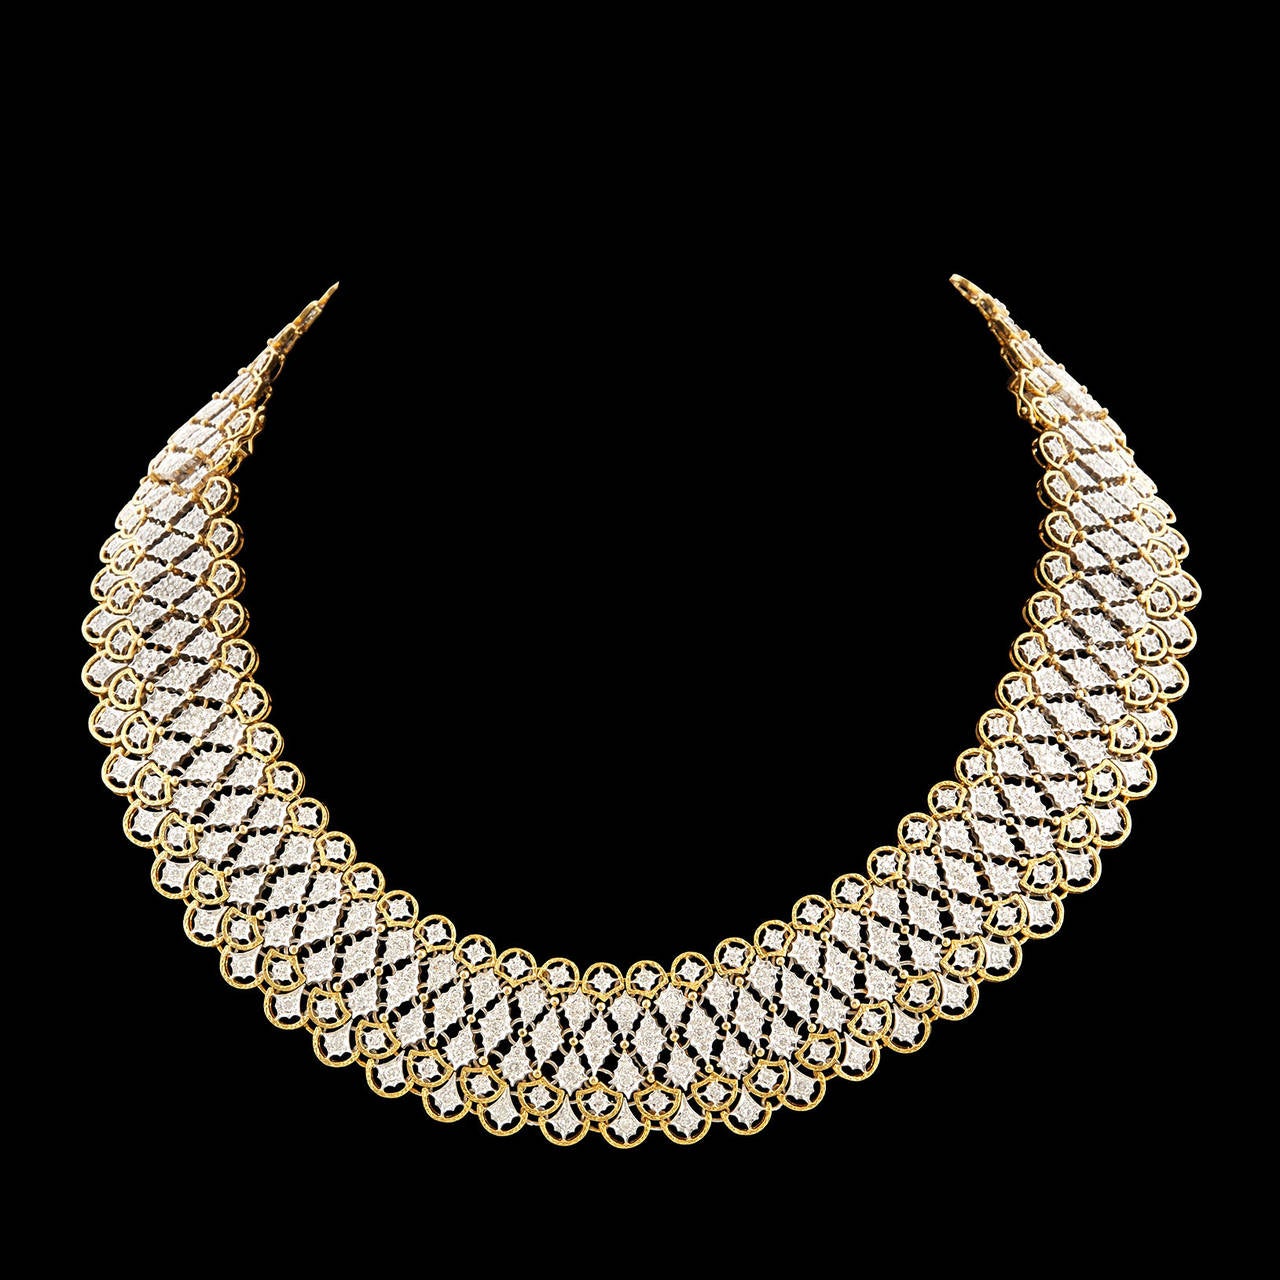 18Kt Two-Tone White & Yellow Gold Collar Necklace set with 512 Round Full Cut Diamonds Totaling 7.68 Carats. This intricate 2-in-1 necklace has a detachable section that can be used as a bracelet of 7″ in length. Total length of the necklace is 17″